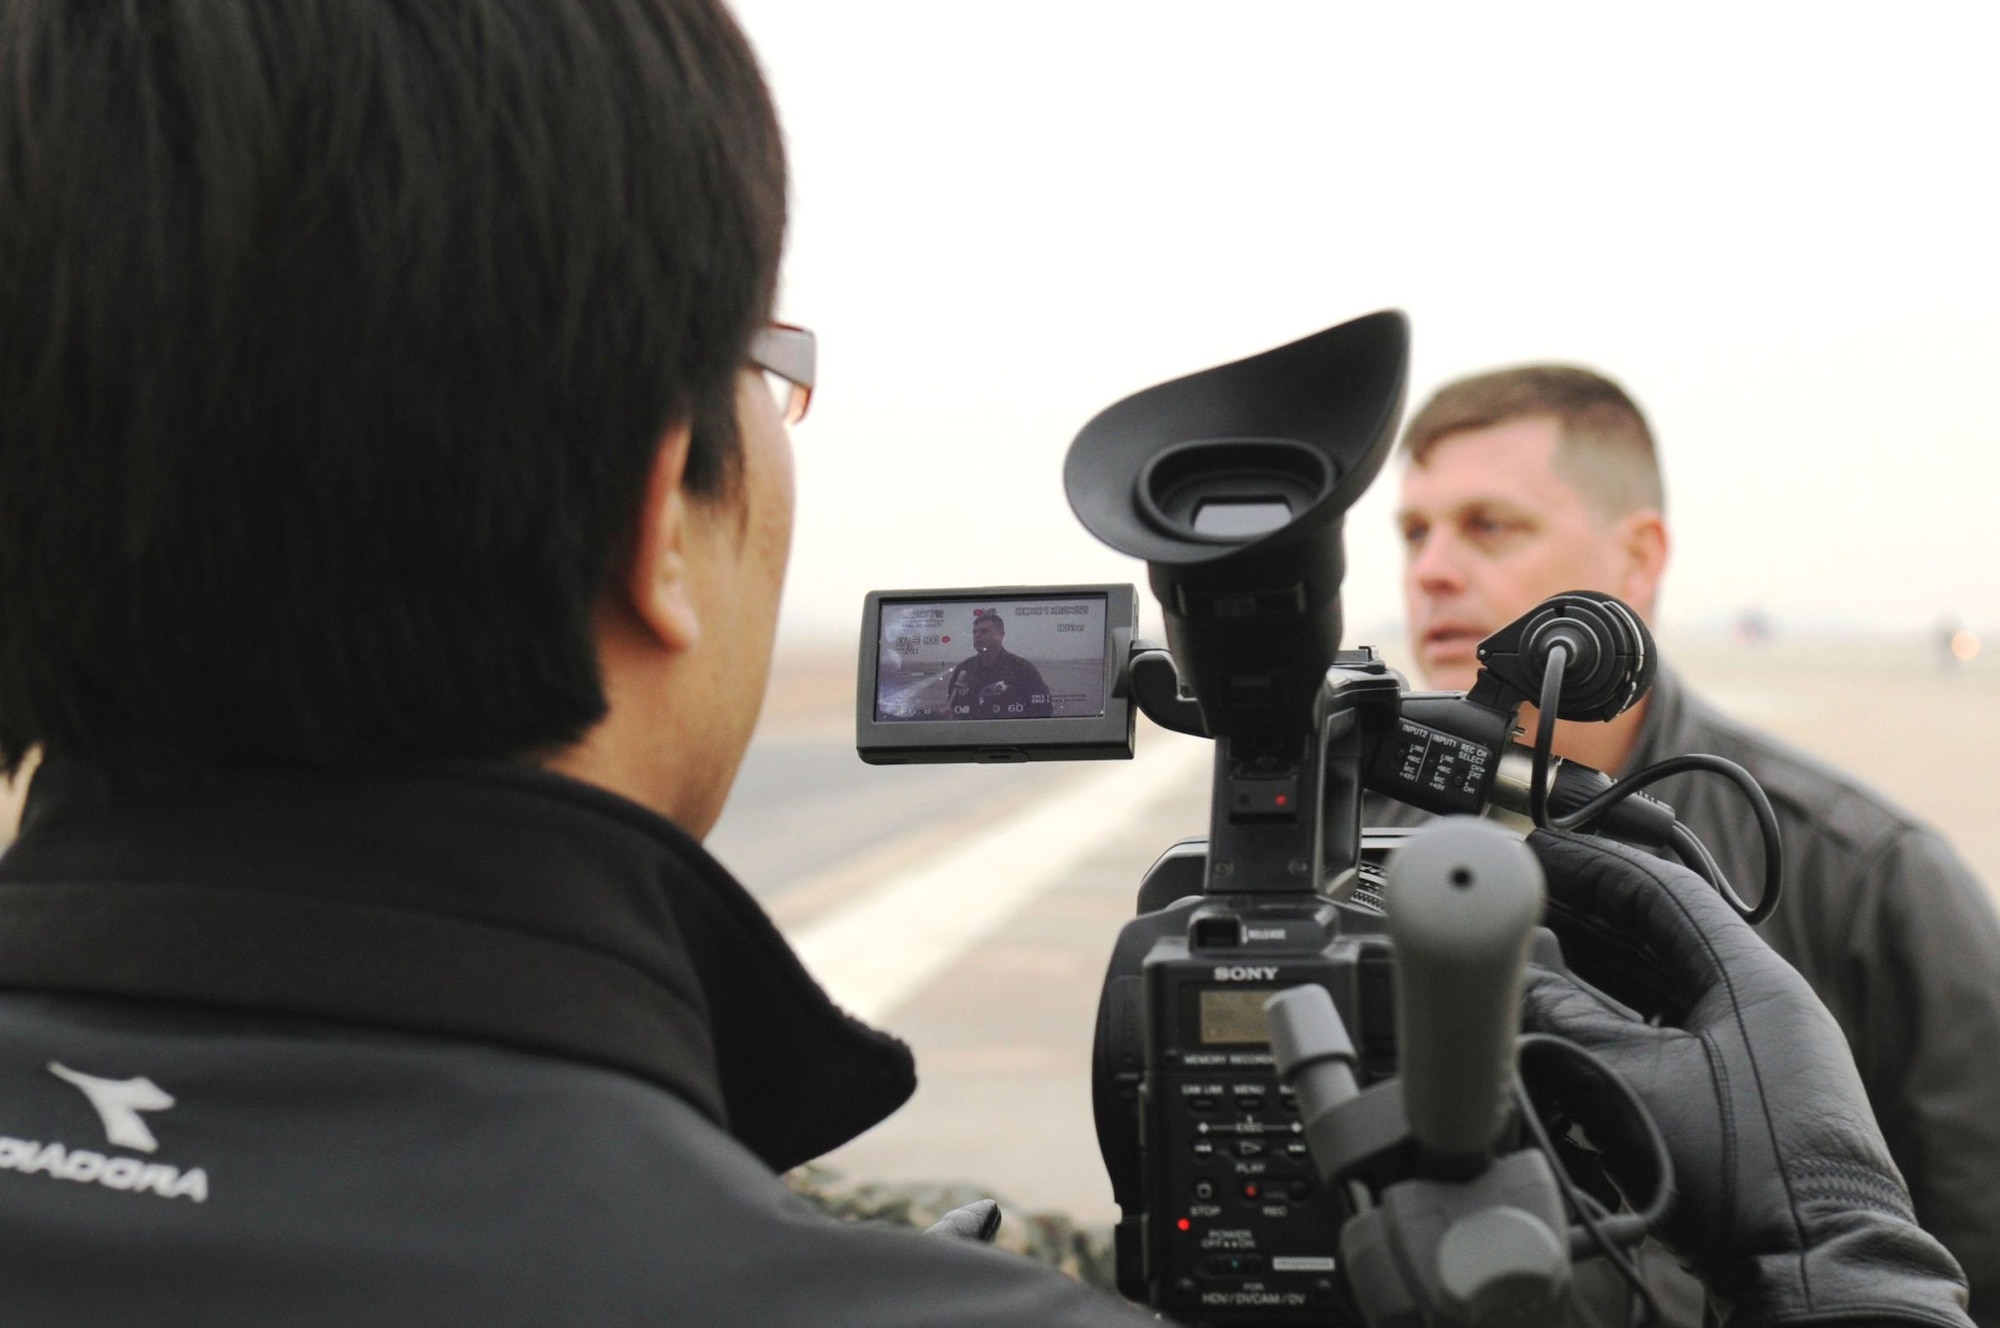 Col. Craig Leavitt, 8th Operations Group commander, is interviewed by local Korean media March 2, 2012, during a combat generation exercise on Kunsan Air Base, Republic of Korea. The exercise, referred to as an “Elephant Walk,” brought together fighter aircraft from five combined units from both American and Korean Air Forces. (U.S. Air Force photo by Senior Airman Jessica Hines/Released)